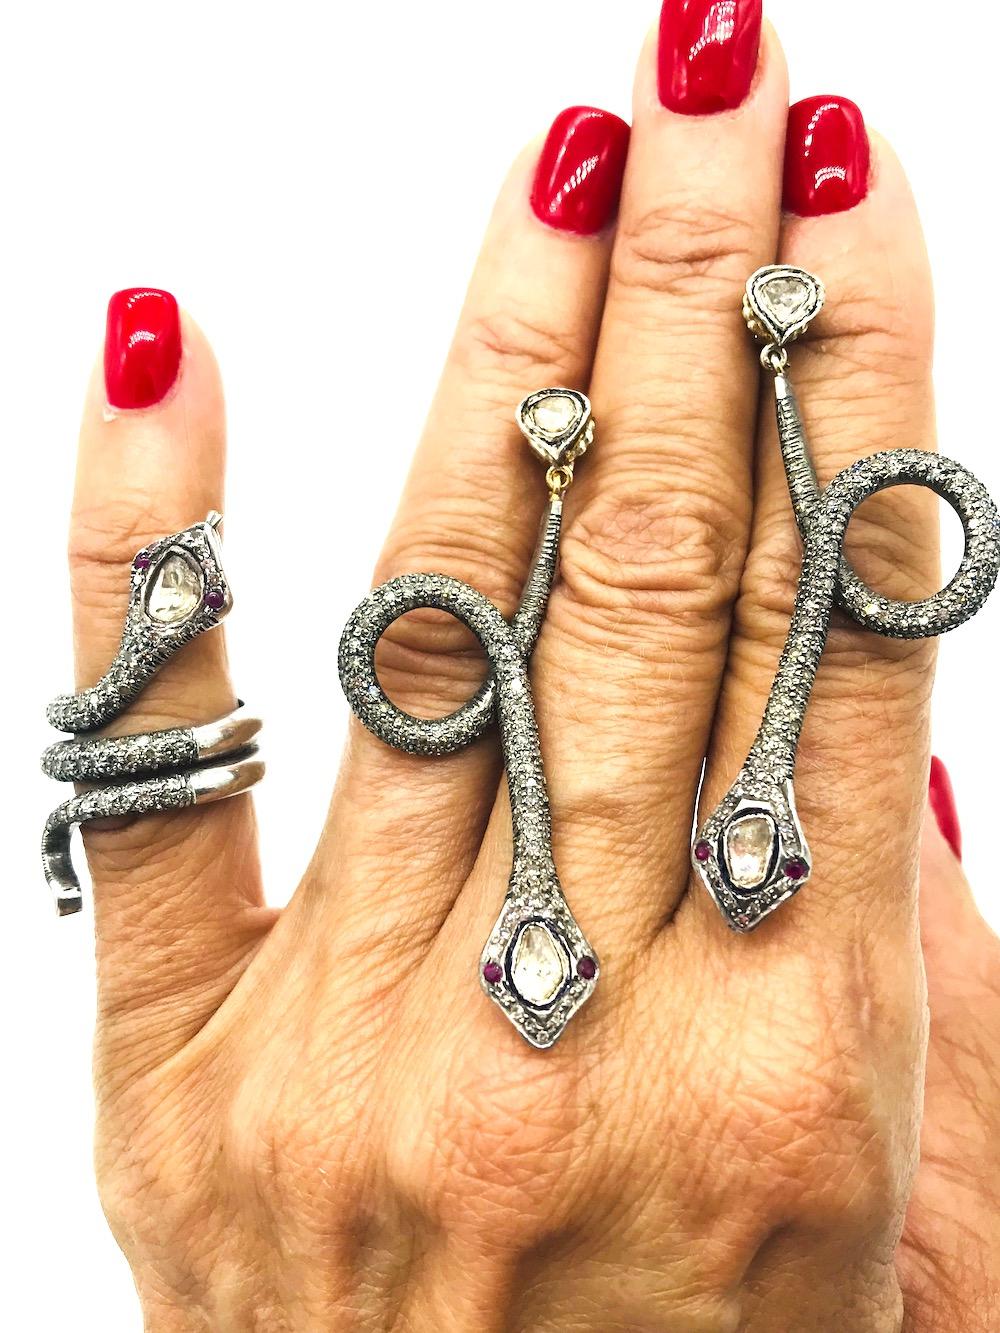 Snake Earrings and Ring, Circa 18th Century, Silver-Diamonds 
Matched set of snake jewelry. The ring is a triple, Size 6 shank expanding 40 mm from tip of head to the tail. The 150 diamonds are encrusted in prongs measurig 1.50-1.60 mm each. The